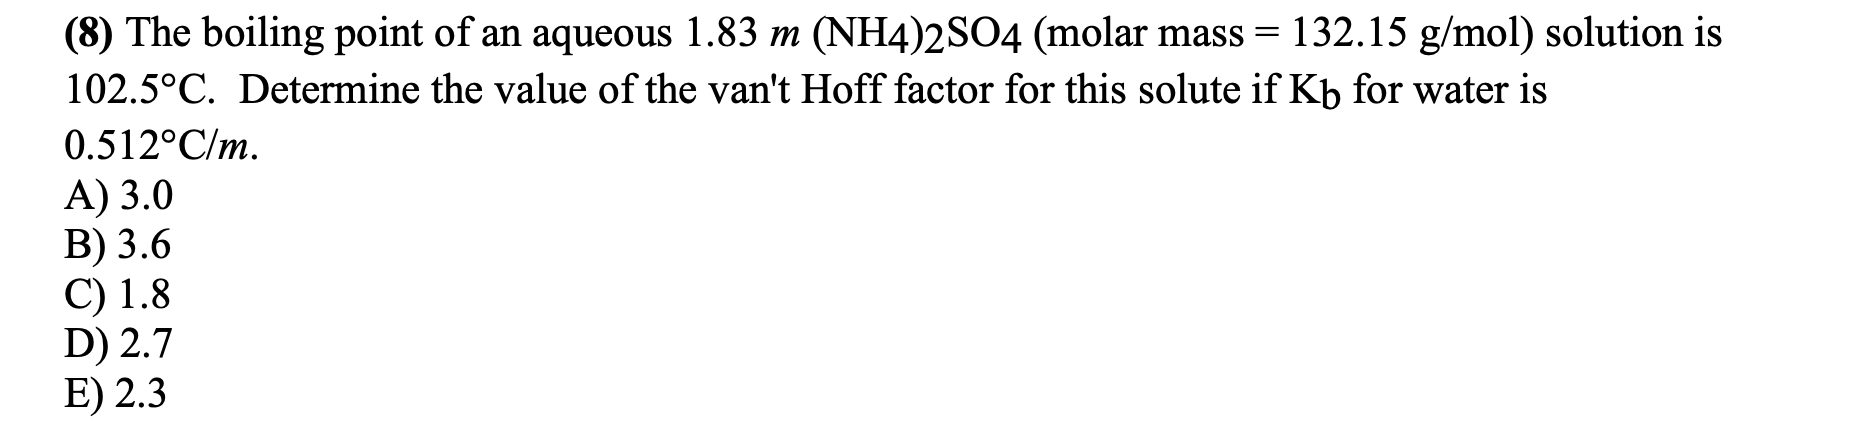 (8) The boiling point of an aqueous 1.83 m (NH4)2SO4 (molar mass = 132.15 g/mol) solution is
102.5°C. Determine the value of the van't Hoff factor for this solute if Kb for water is
0.512°C/m.
A) 3.0
B) 3.6
C) 1.8
D) 2.7
E) 2.3
